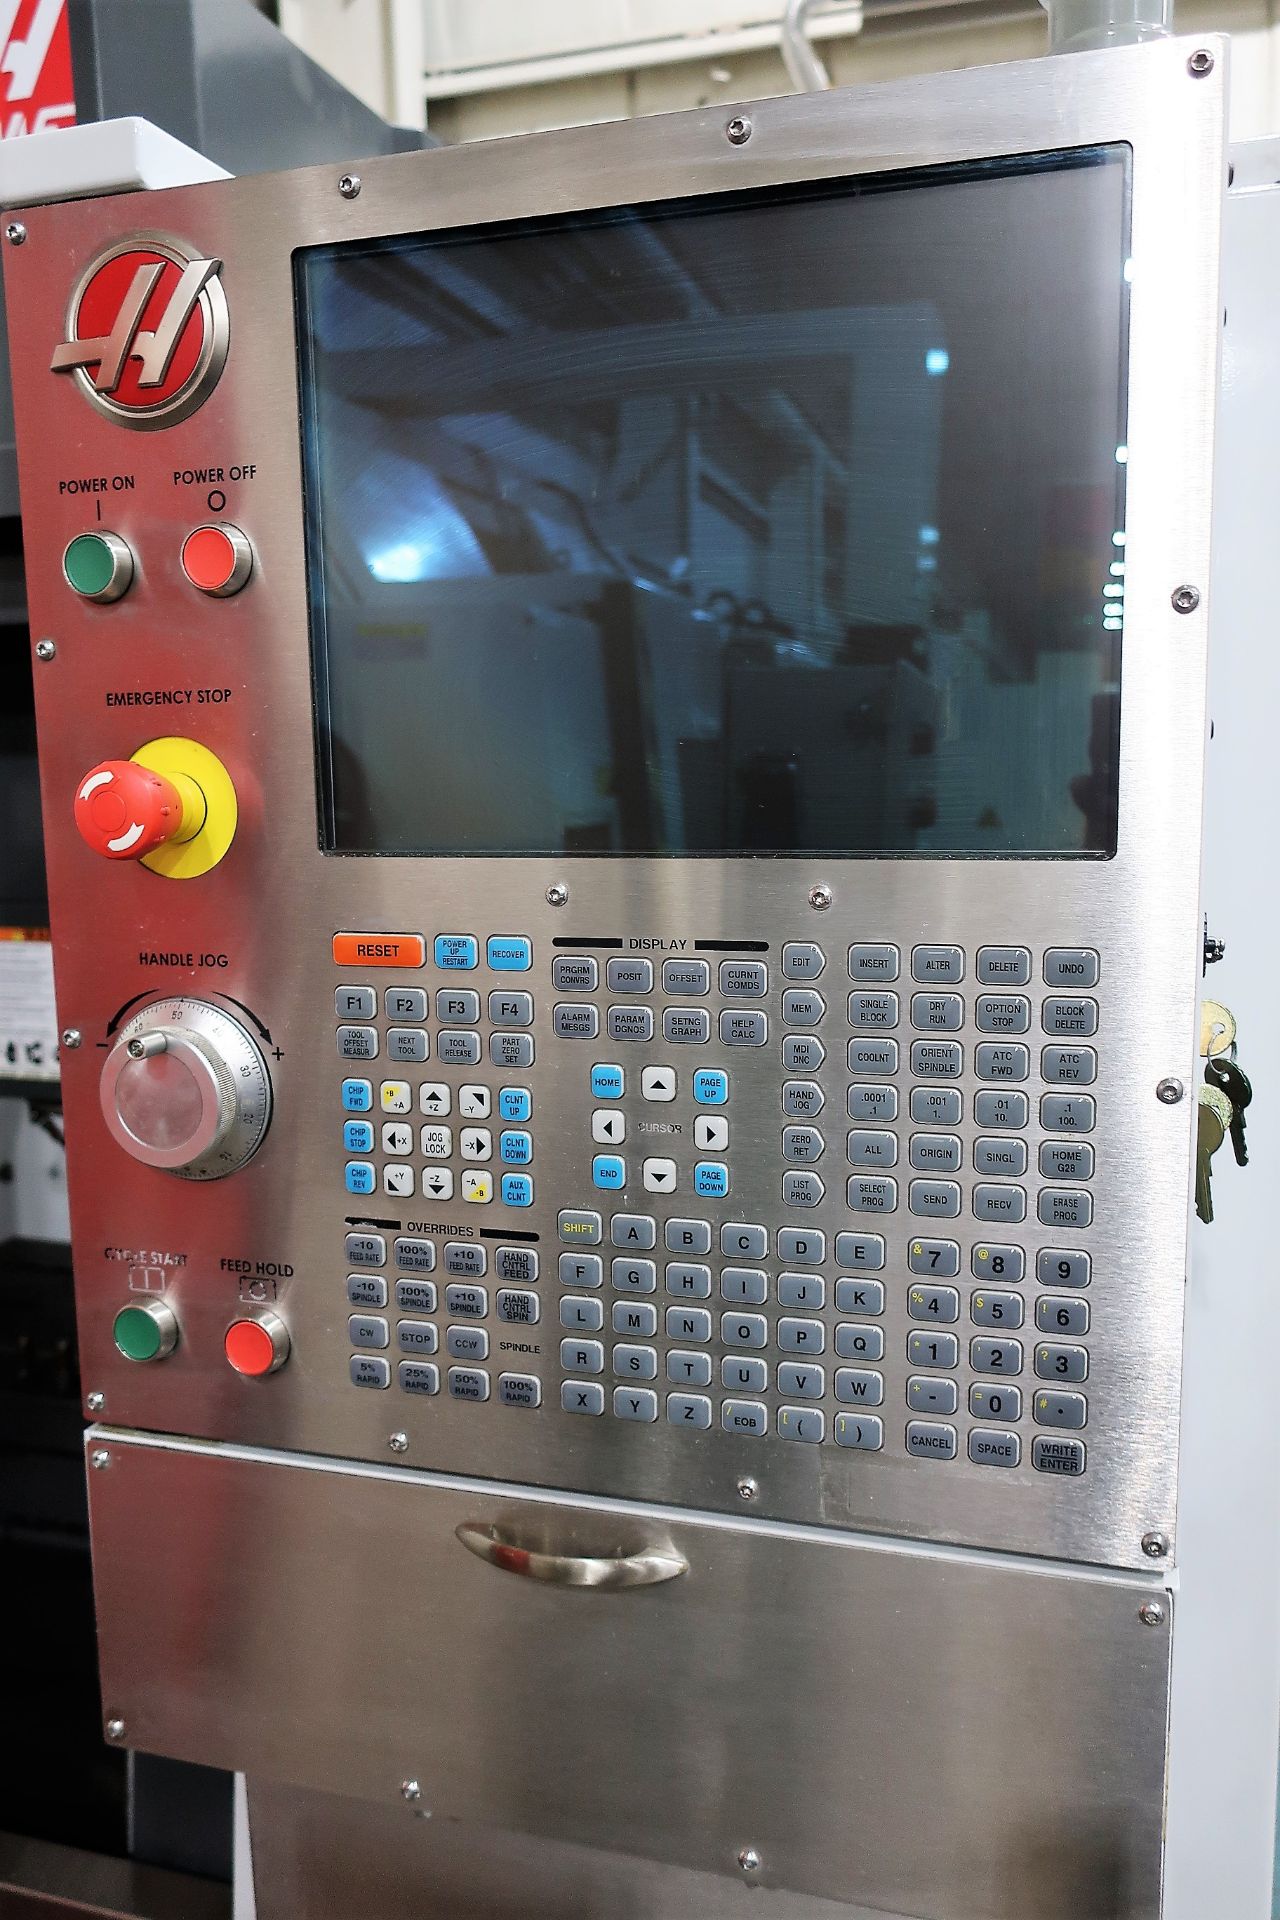 HAAS VF2-YT CNC 3-AXIS VERTICAL MACHINING CENTER, 15,000 RPM SPINDLE, S/N 1102152, NEW 2014 - Image 2 of 7